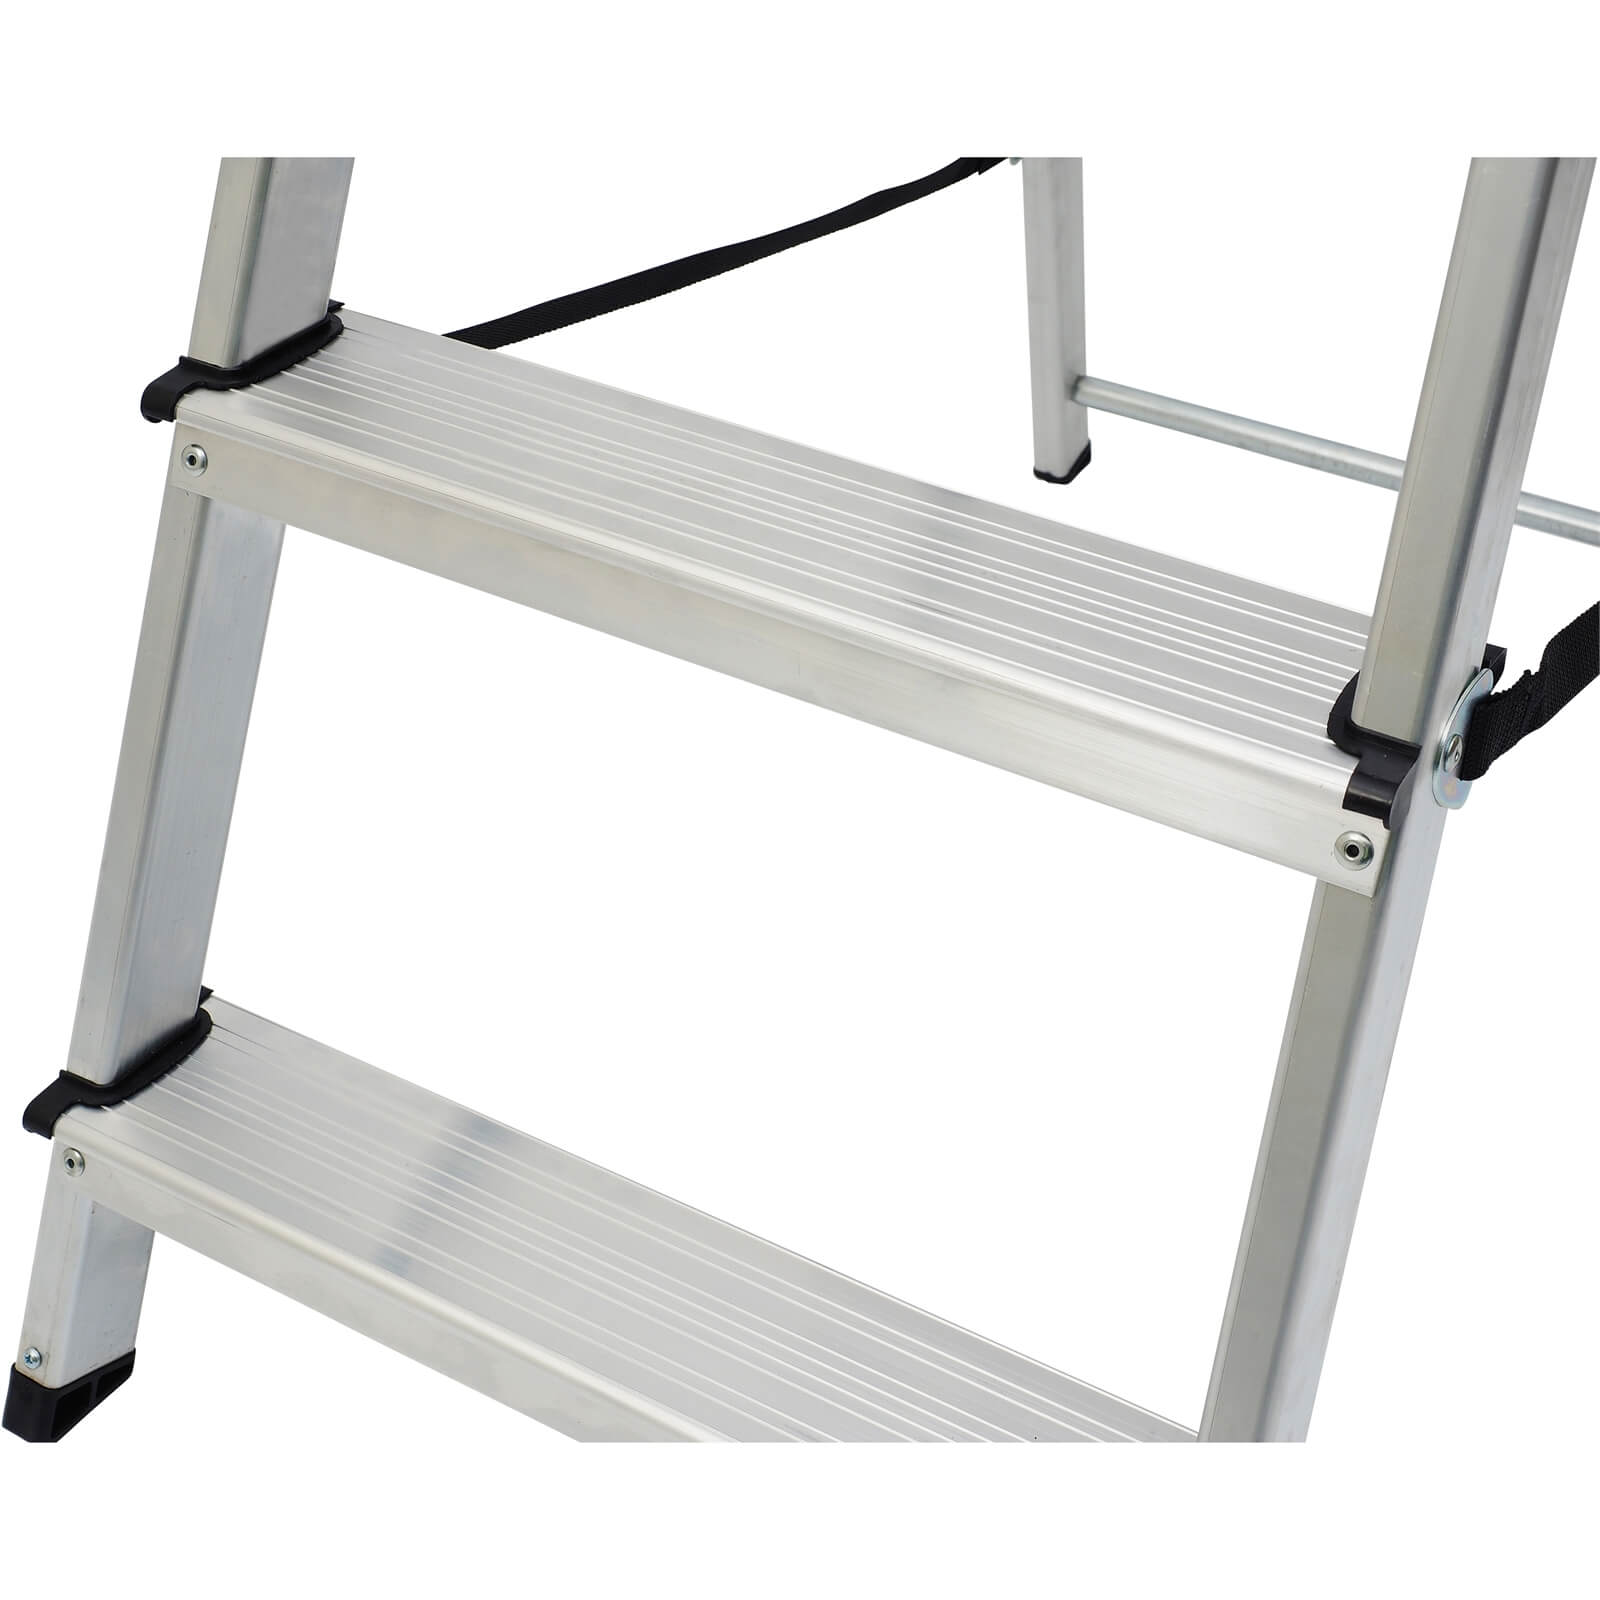 Werner High Handrail Step Ladder with Tool Tray - 6 Tread